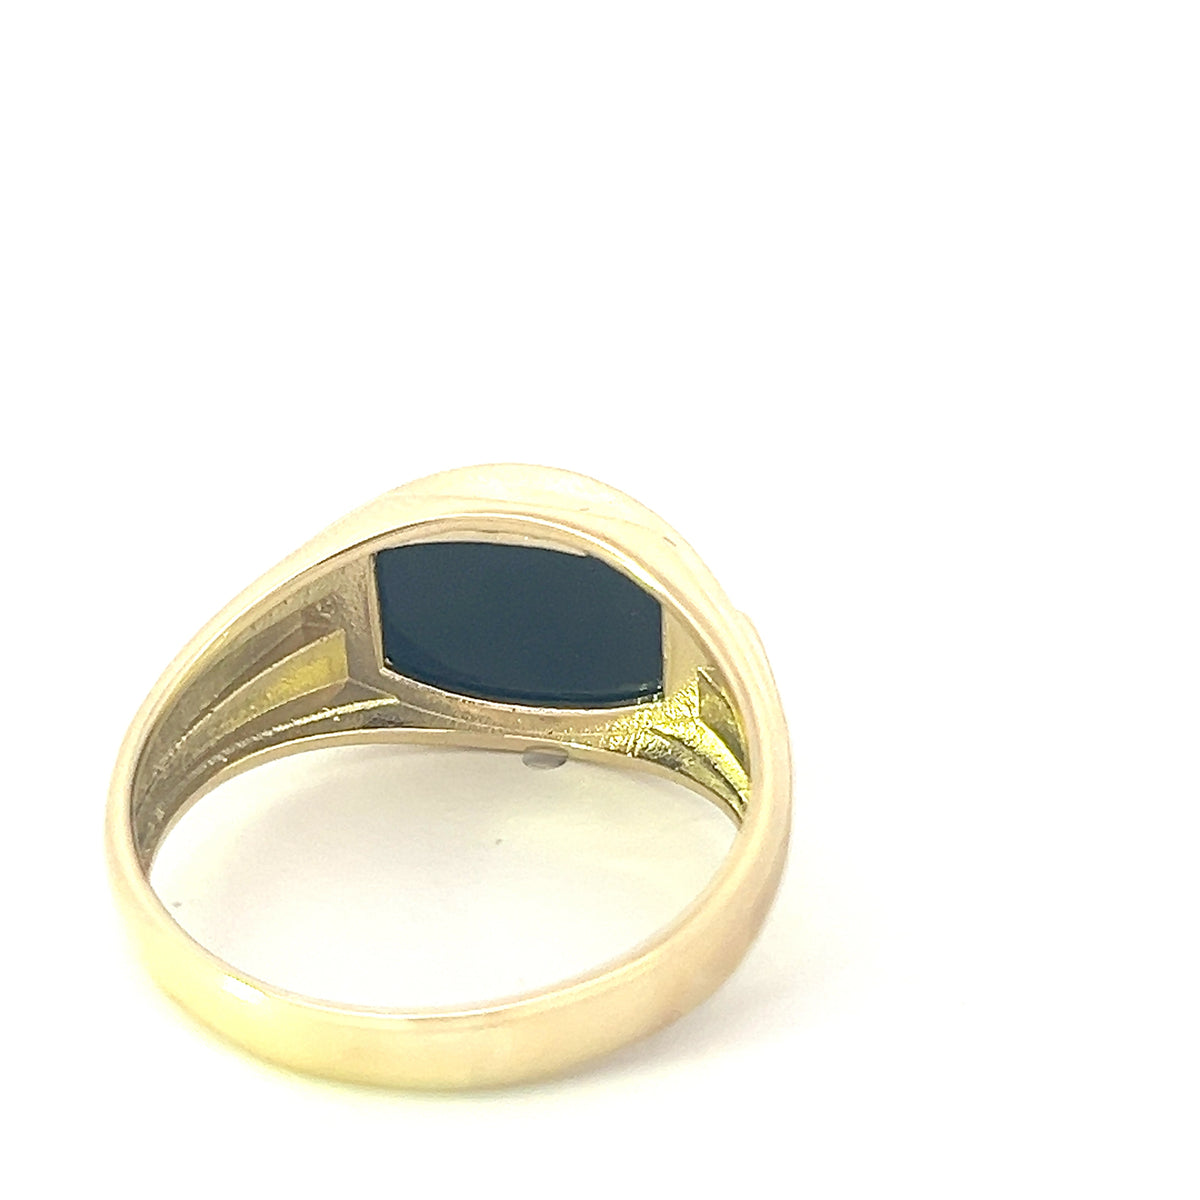 10K Yellow Gold Onyx and 0.014cttw Diamond Gents Ring, size 10